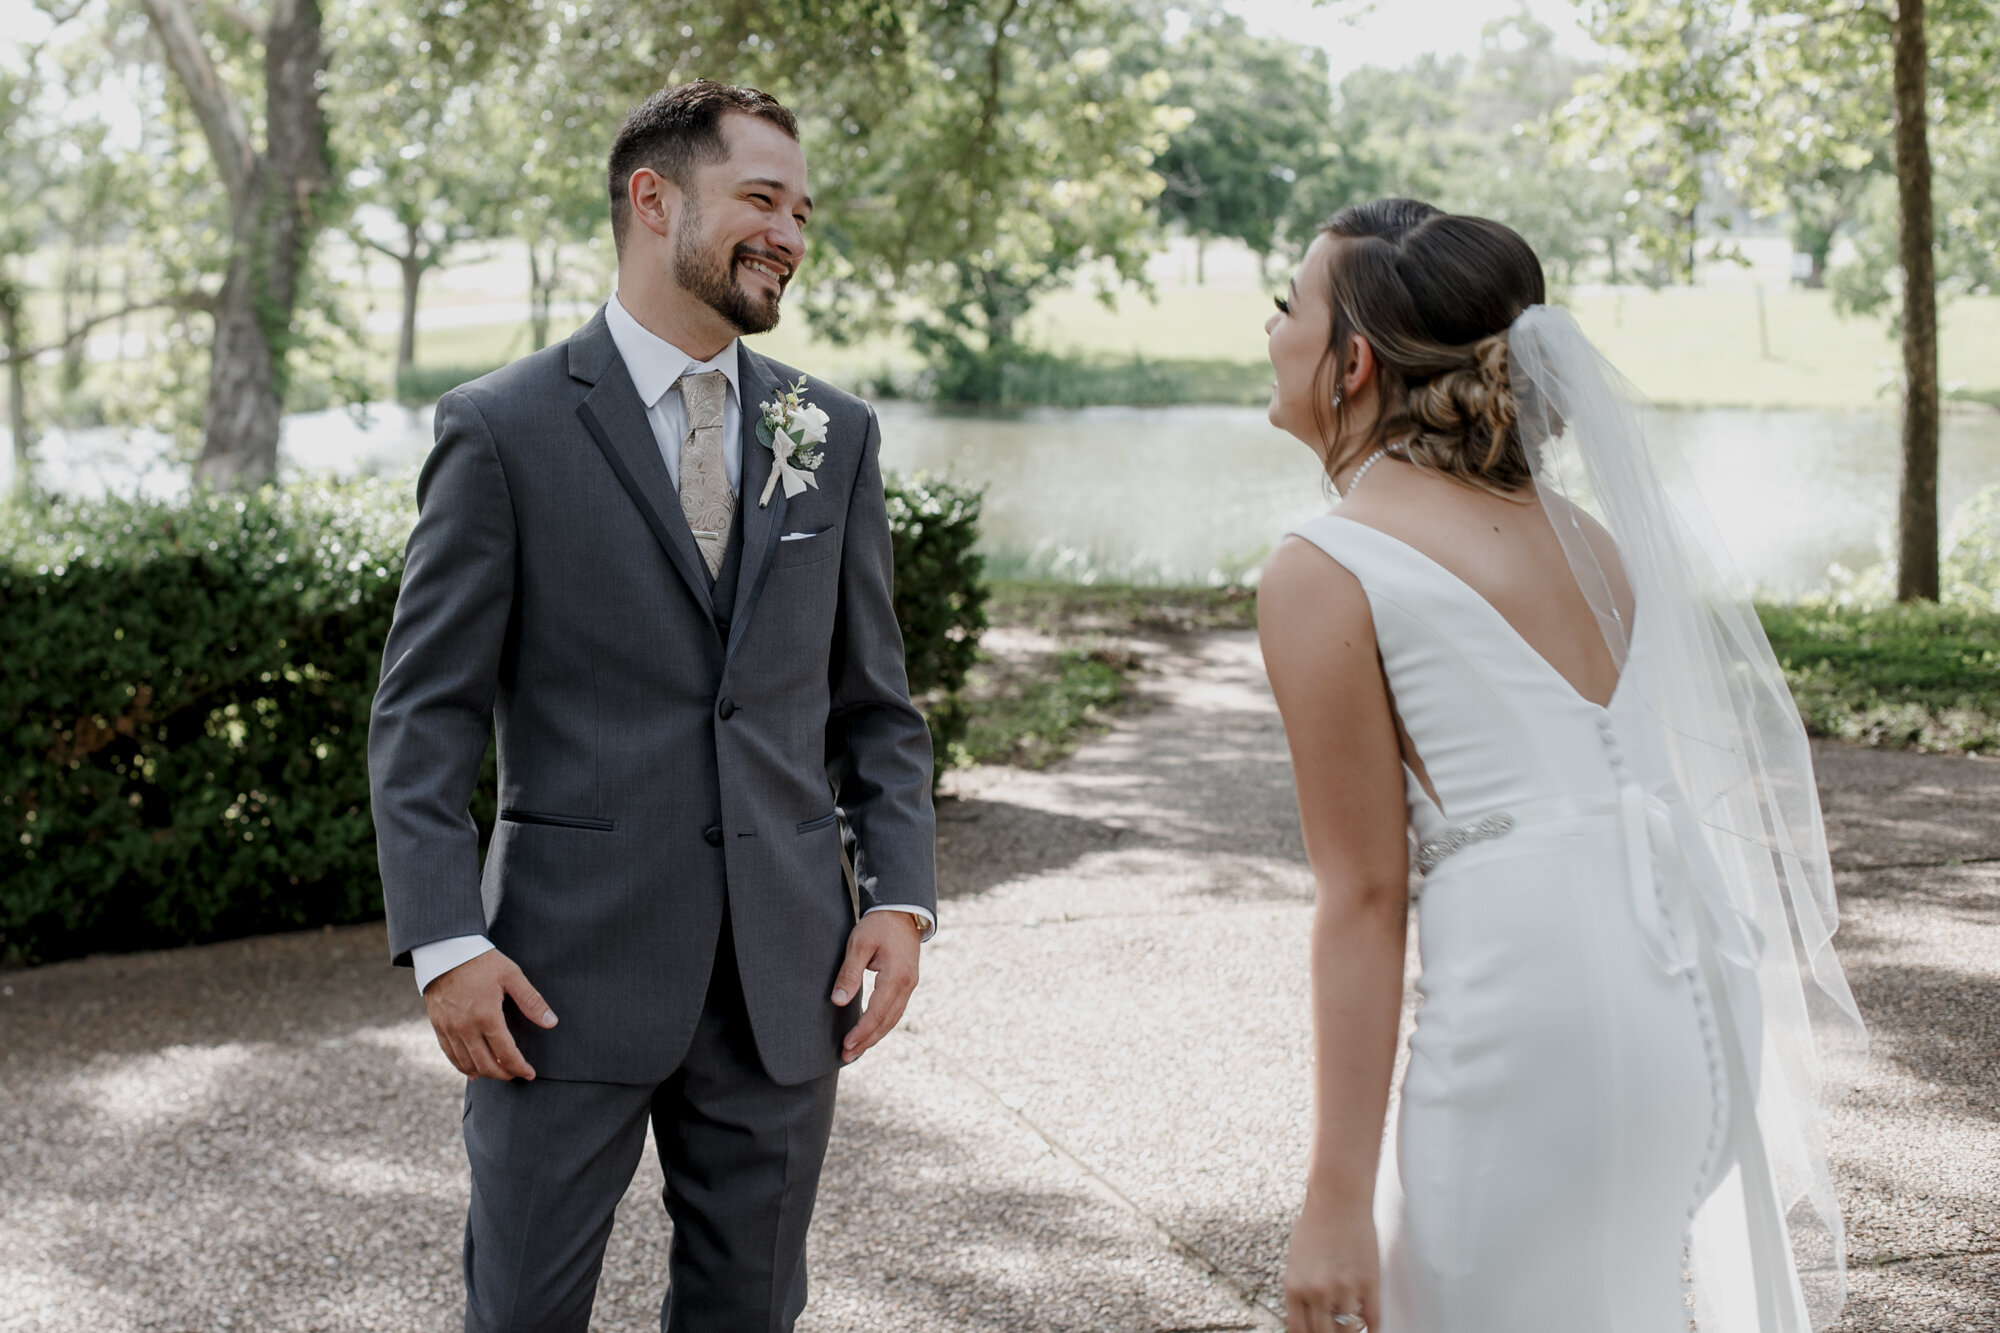 Bride and groom first look. Glowing Wedding in Golden Champagne Tones at The Orchard at Caney Creek in Wharton, TX